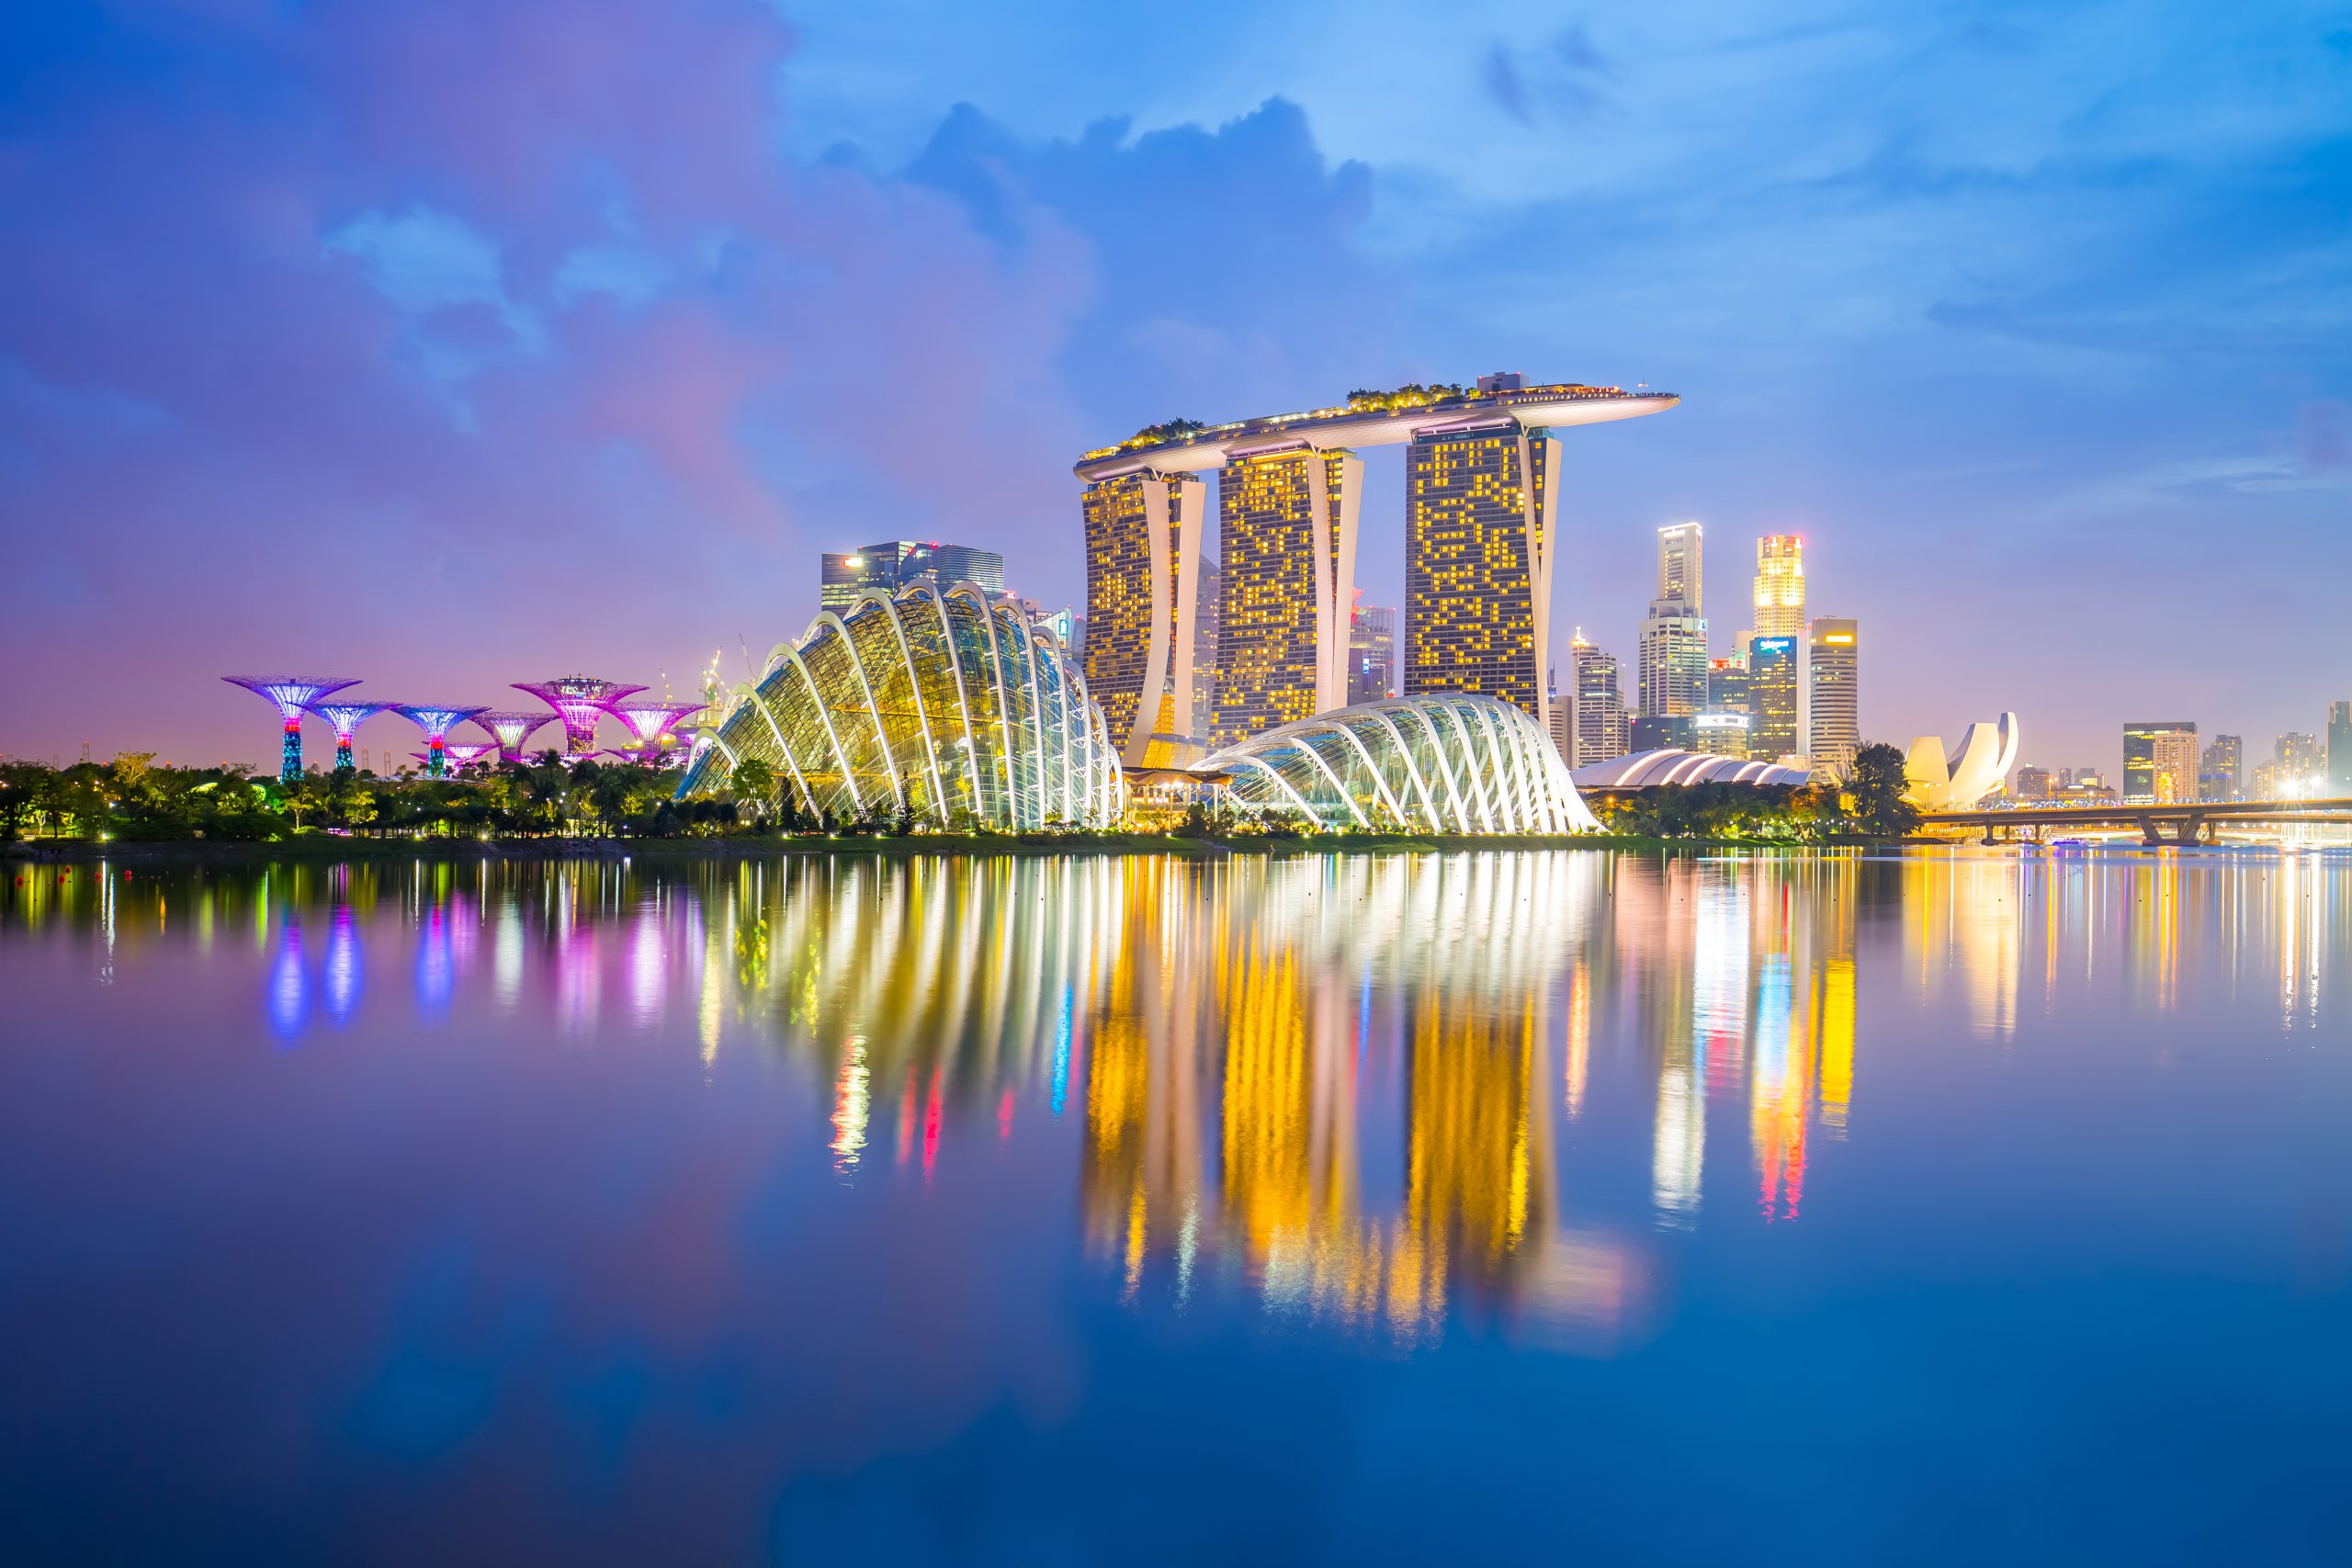 Cruise onboard the Pacific Encounter from Brisbane to Singapore for $133 per night per person